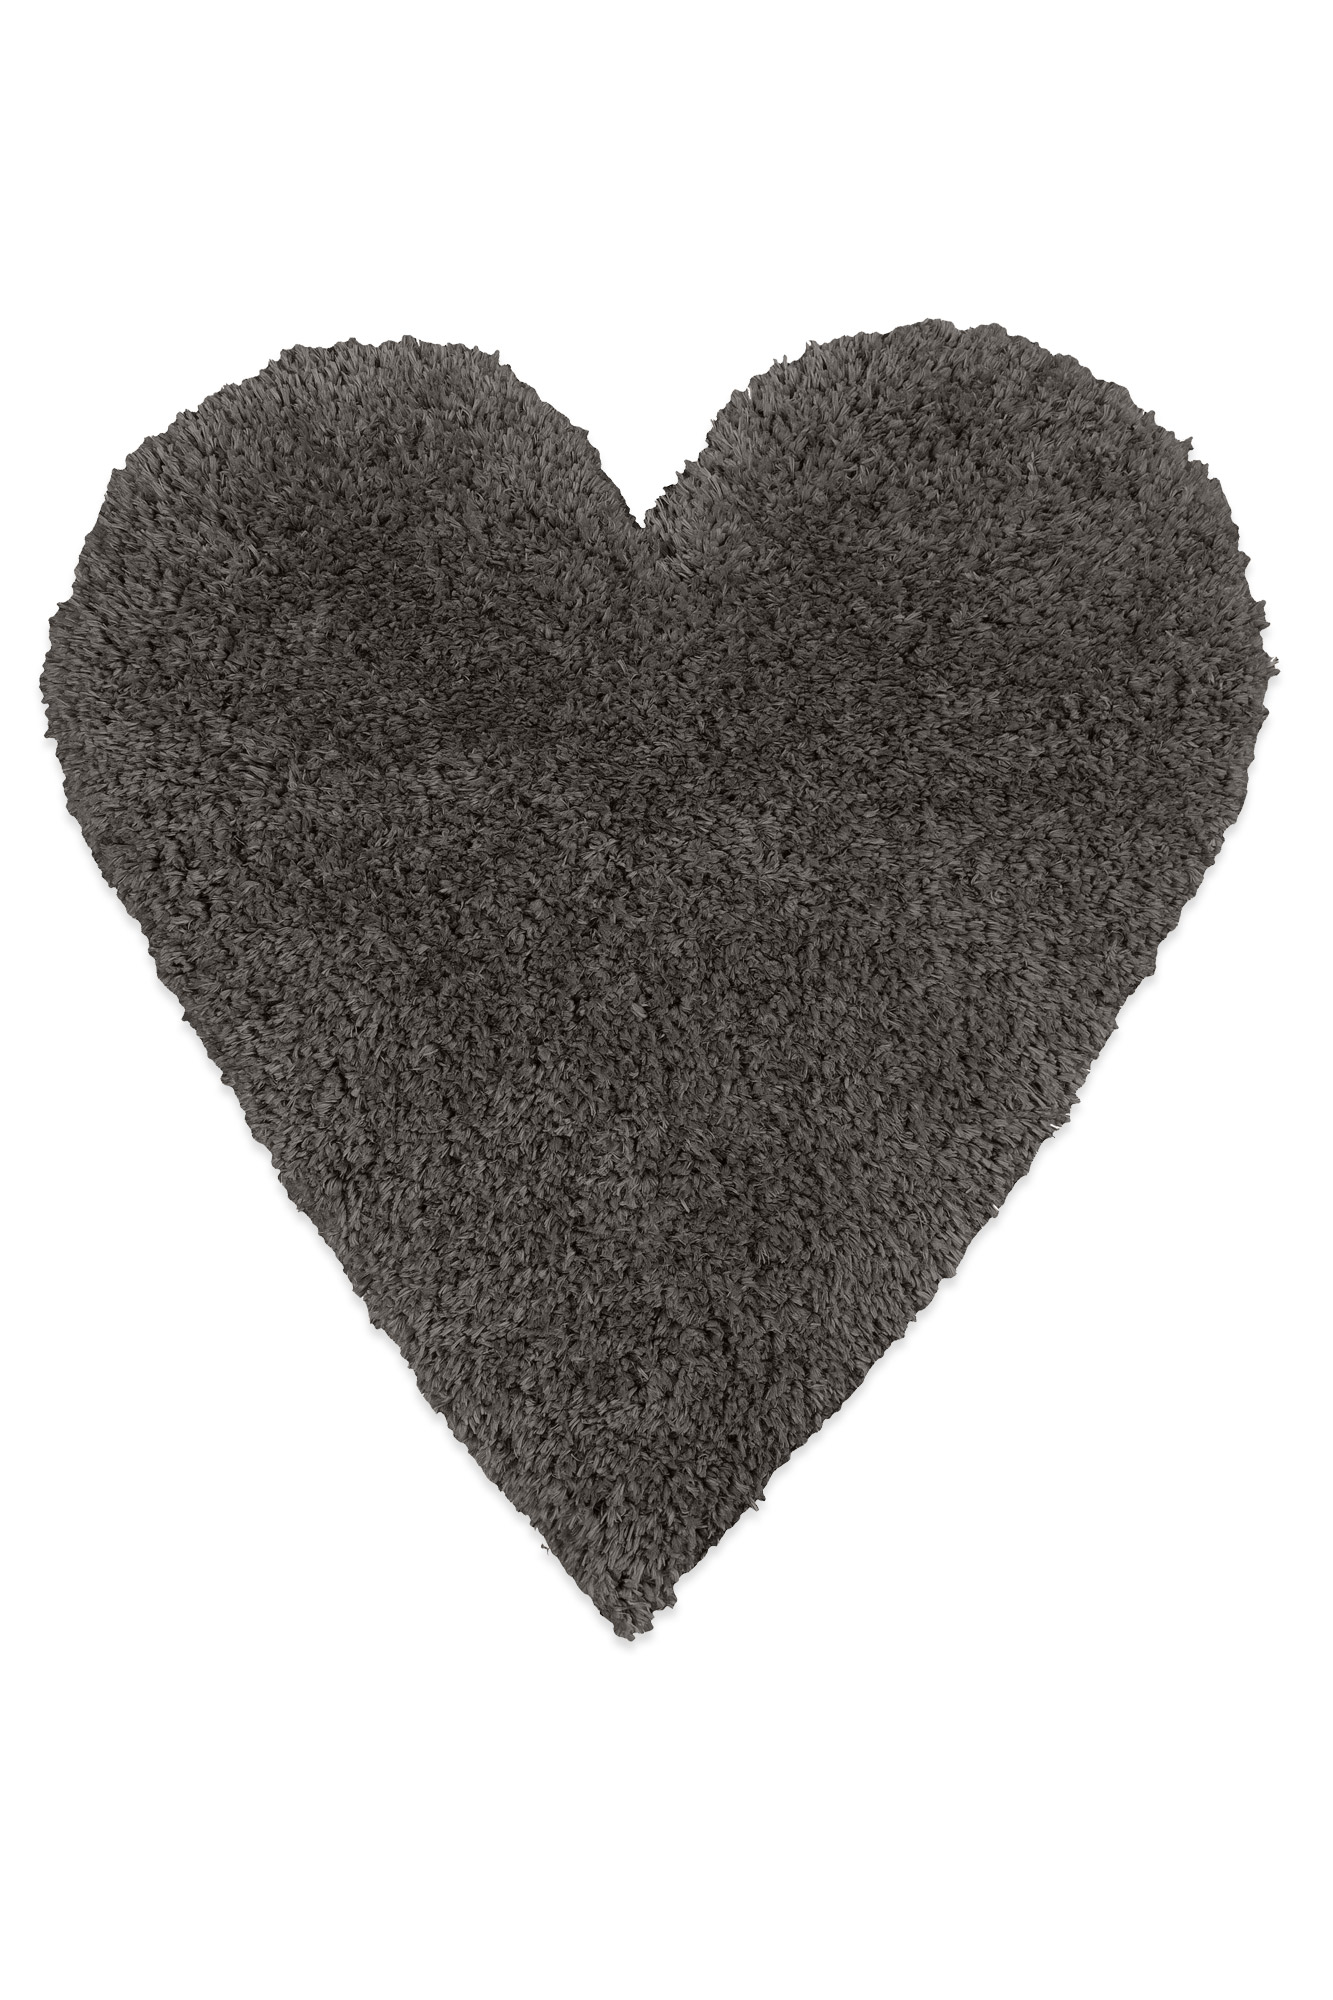 ANTHRACITE-SHADE-HEART